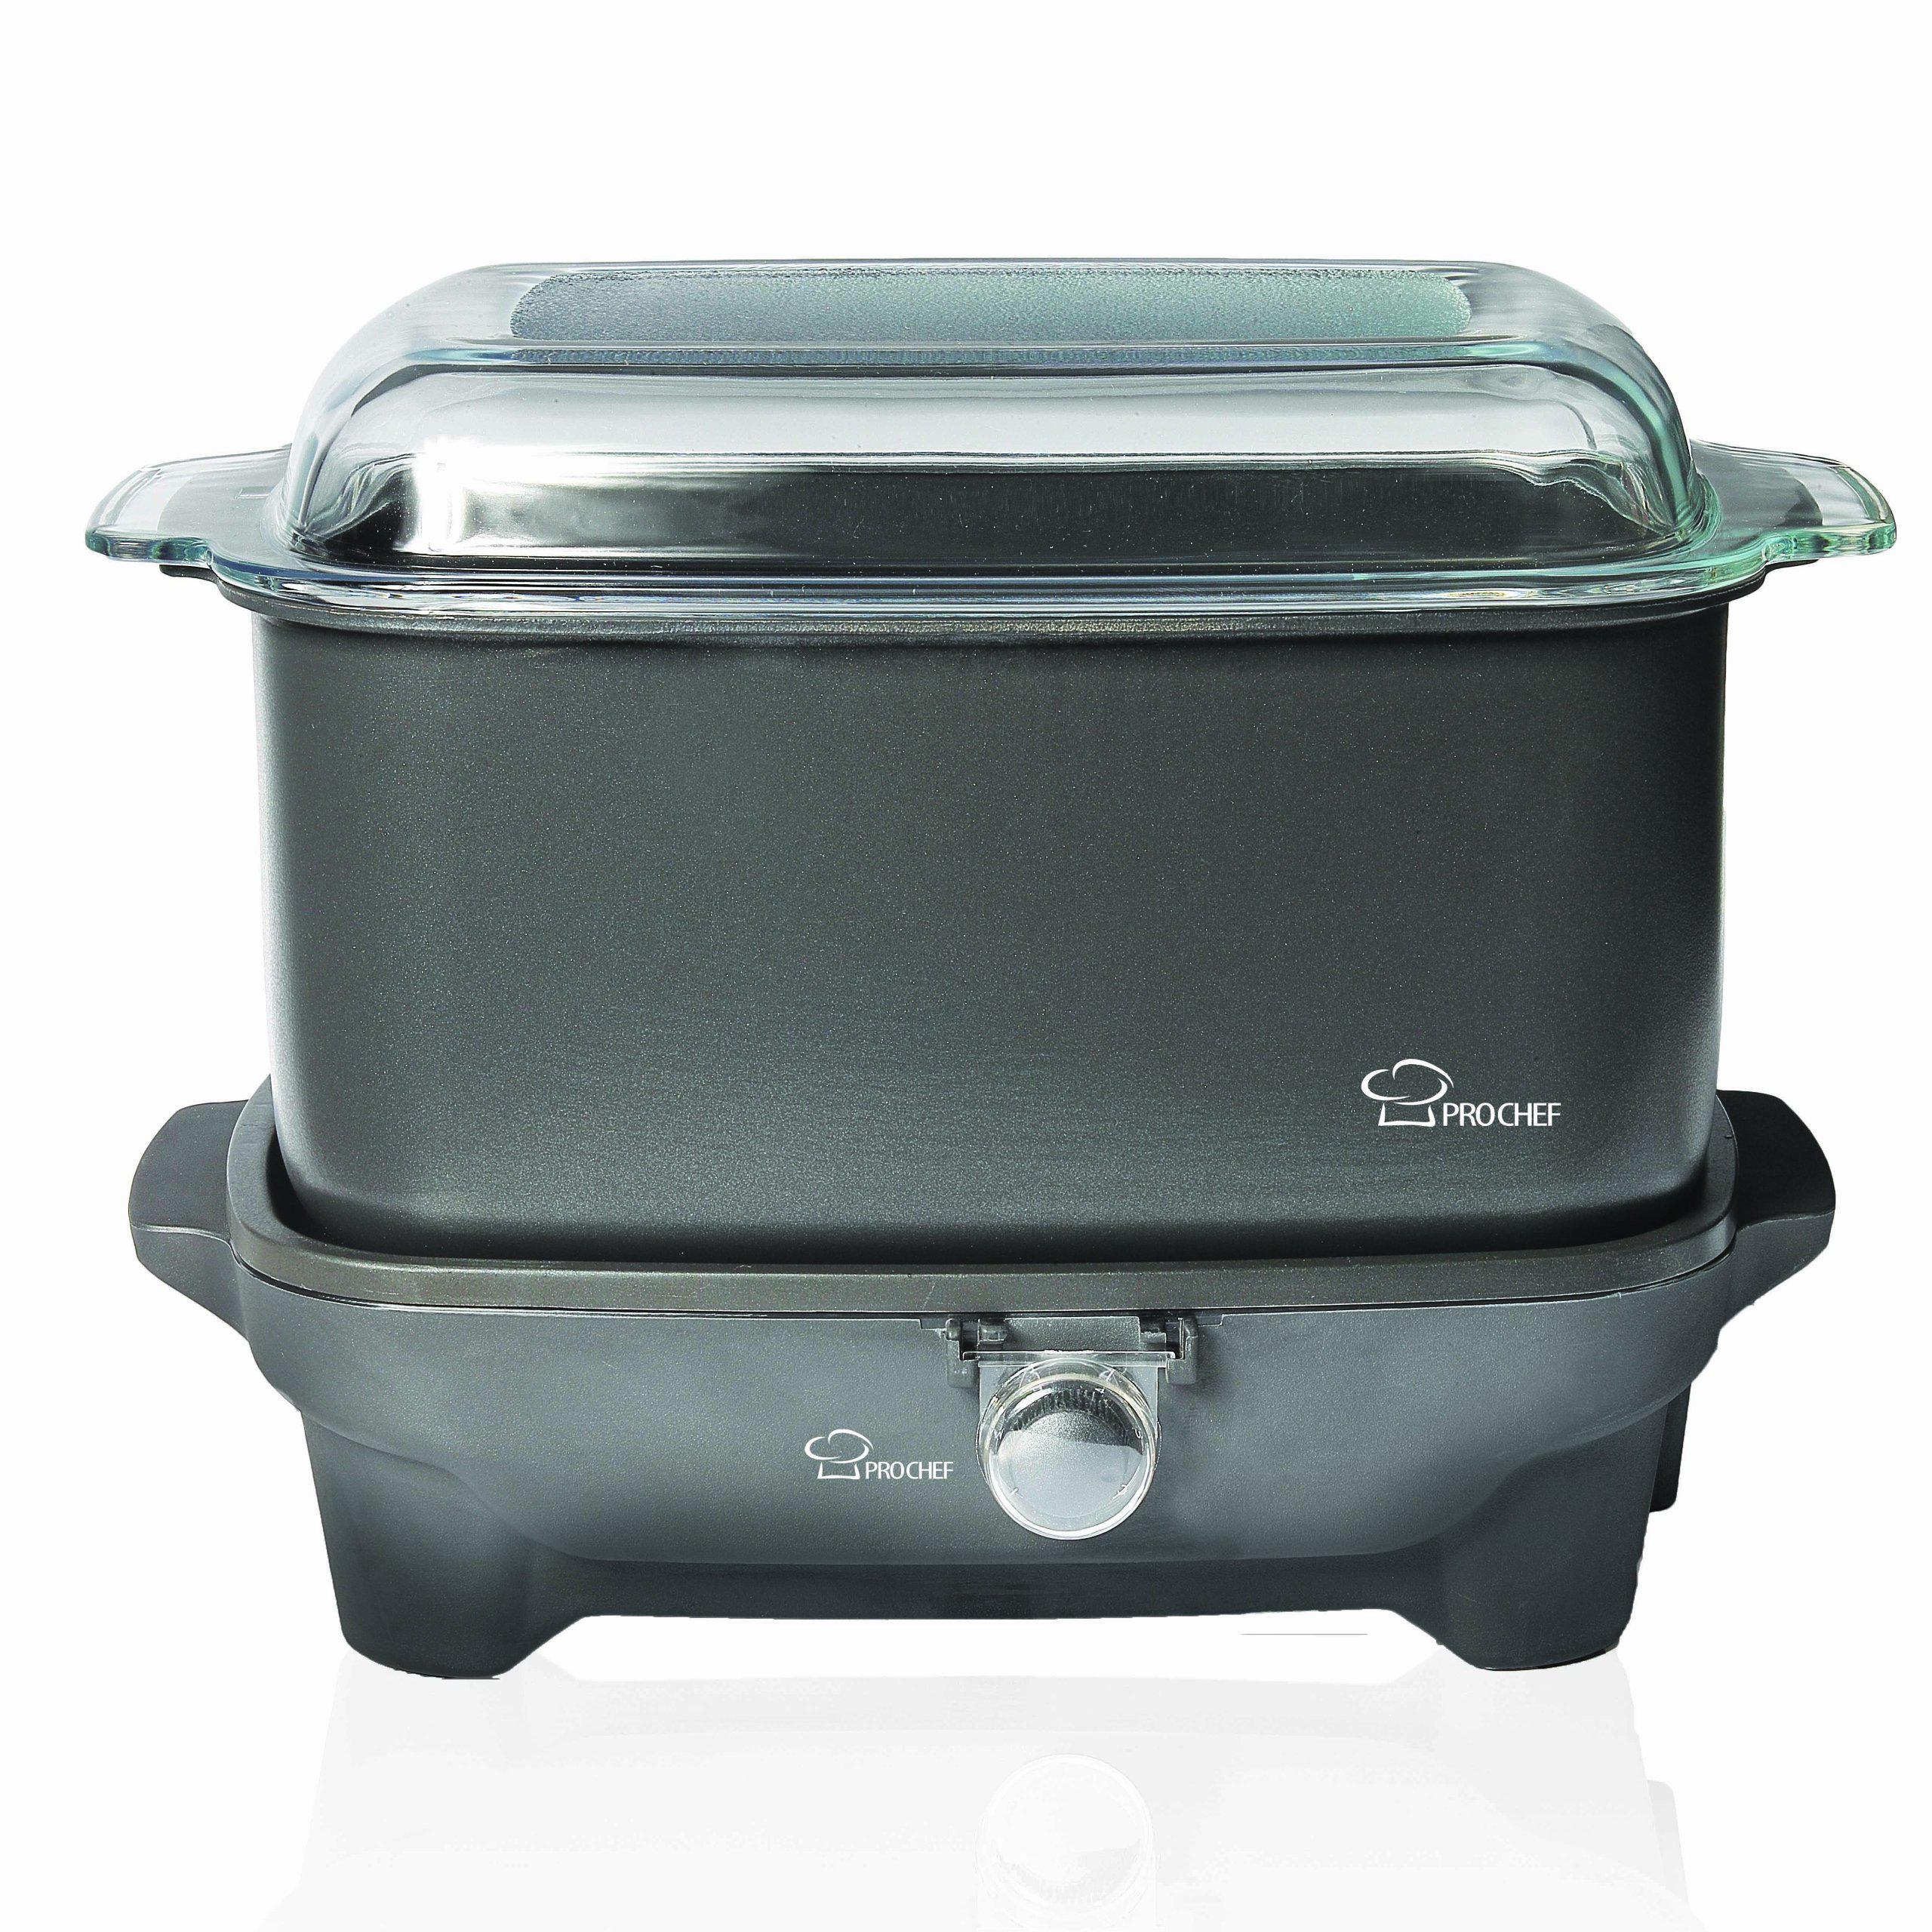 prochef pcs900 9-quart extra large shabbos sure slow cooker includes deep dish glass cover and blech.